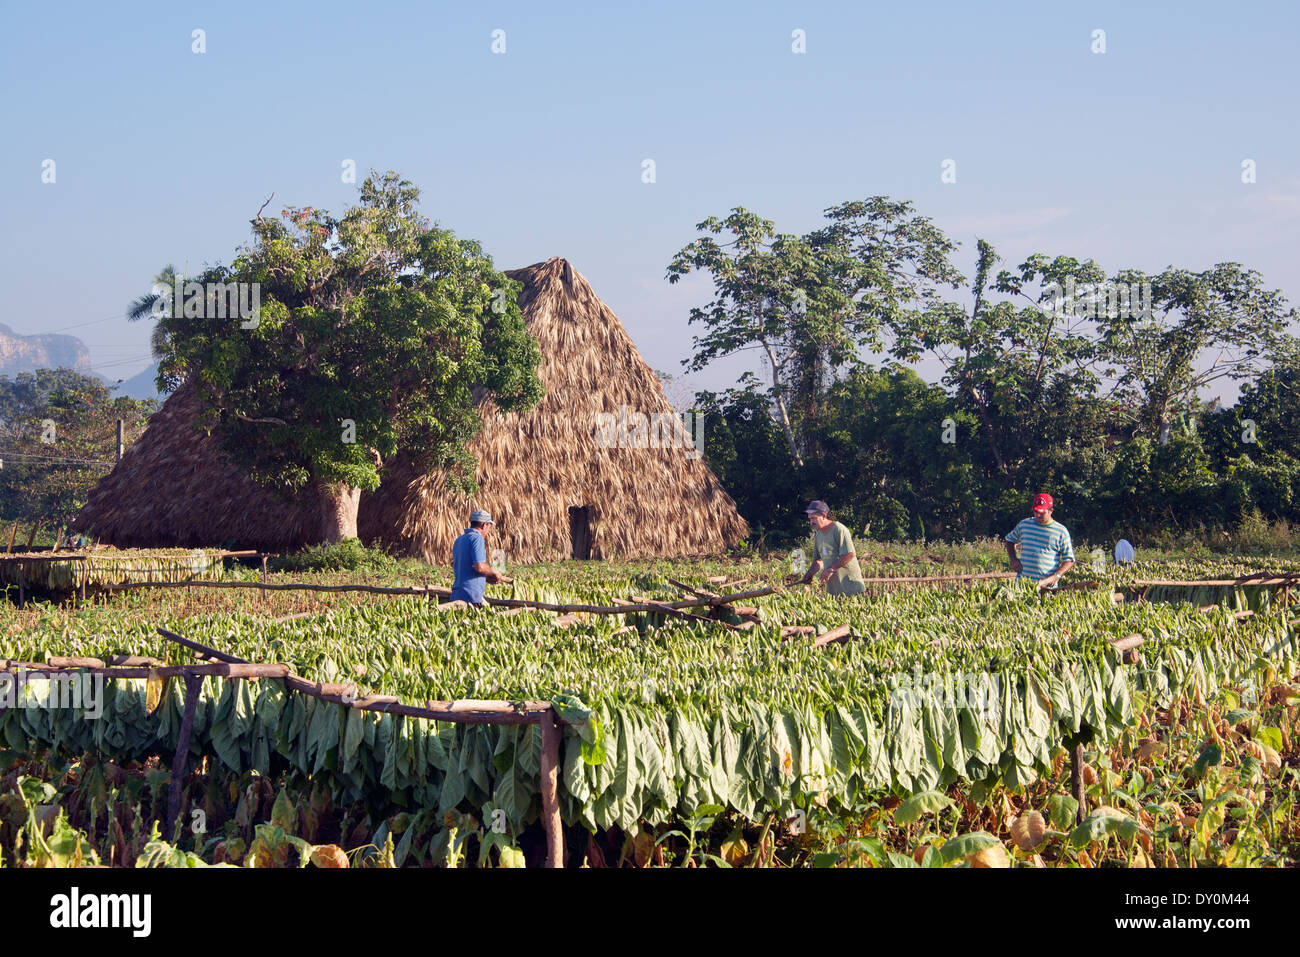 Tobacco workers drying tobacco Vinales Cuba Stock Photo